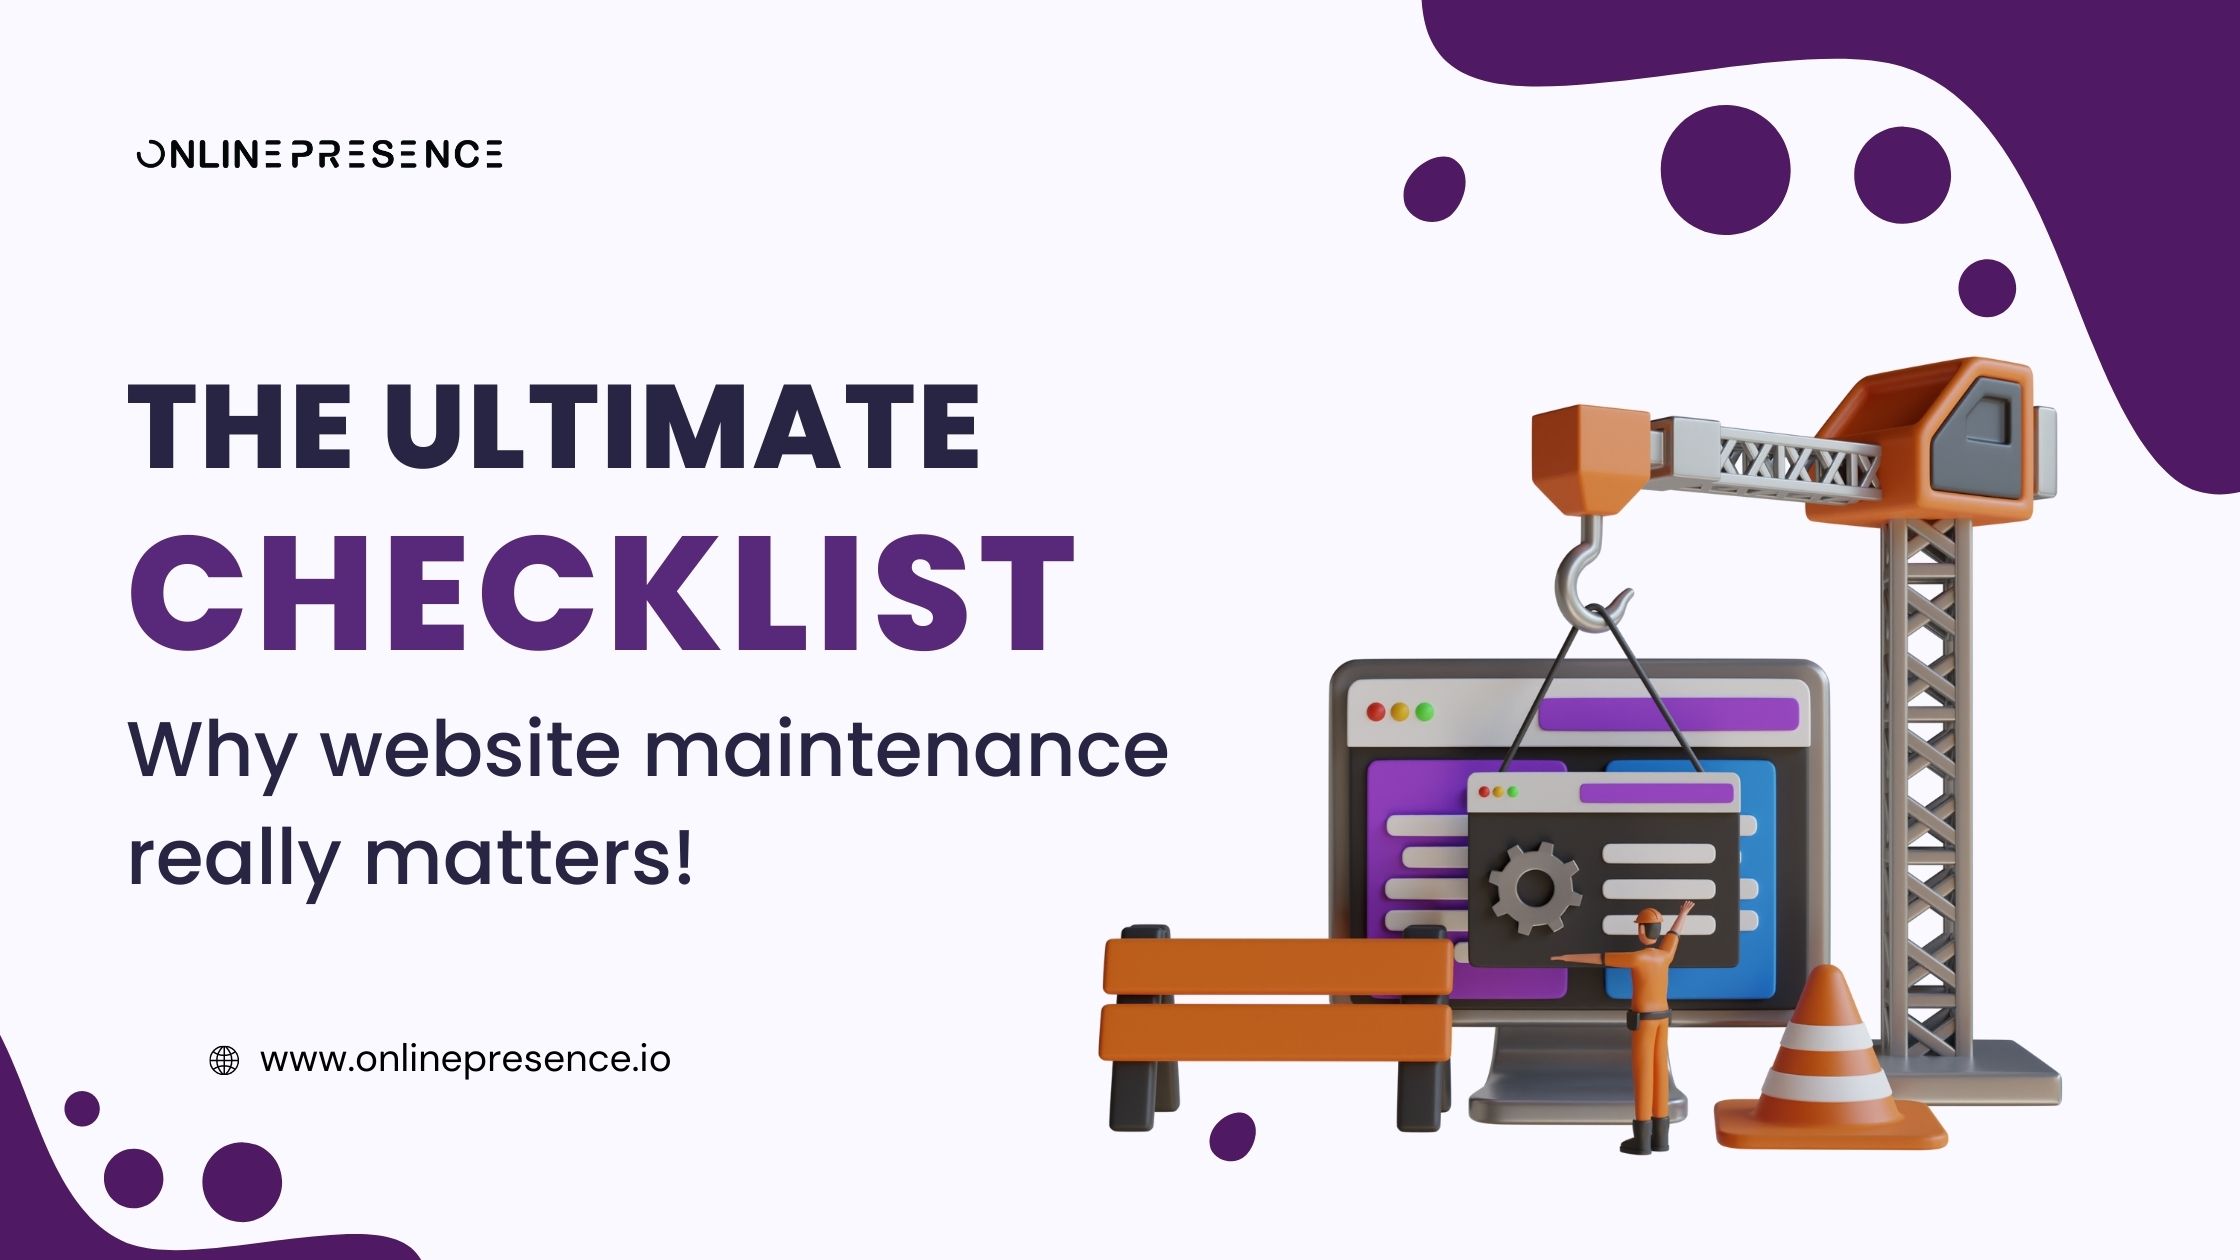 THE ULTIMATE CHECKLIST: WHY WEBSITE MAINTENANCE REALLY MATTERS!